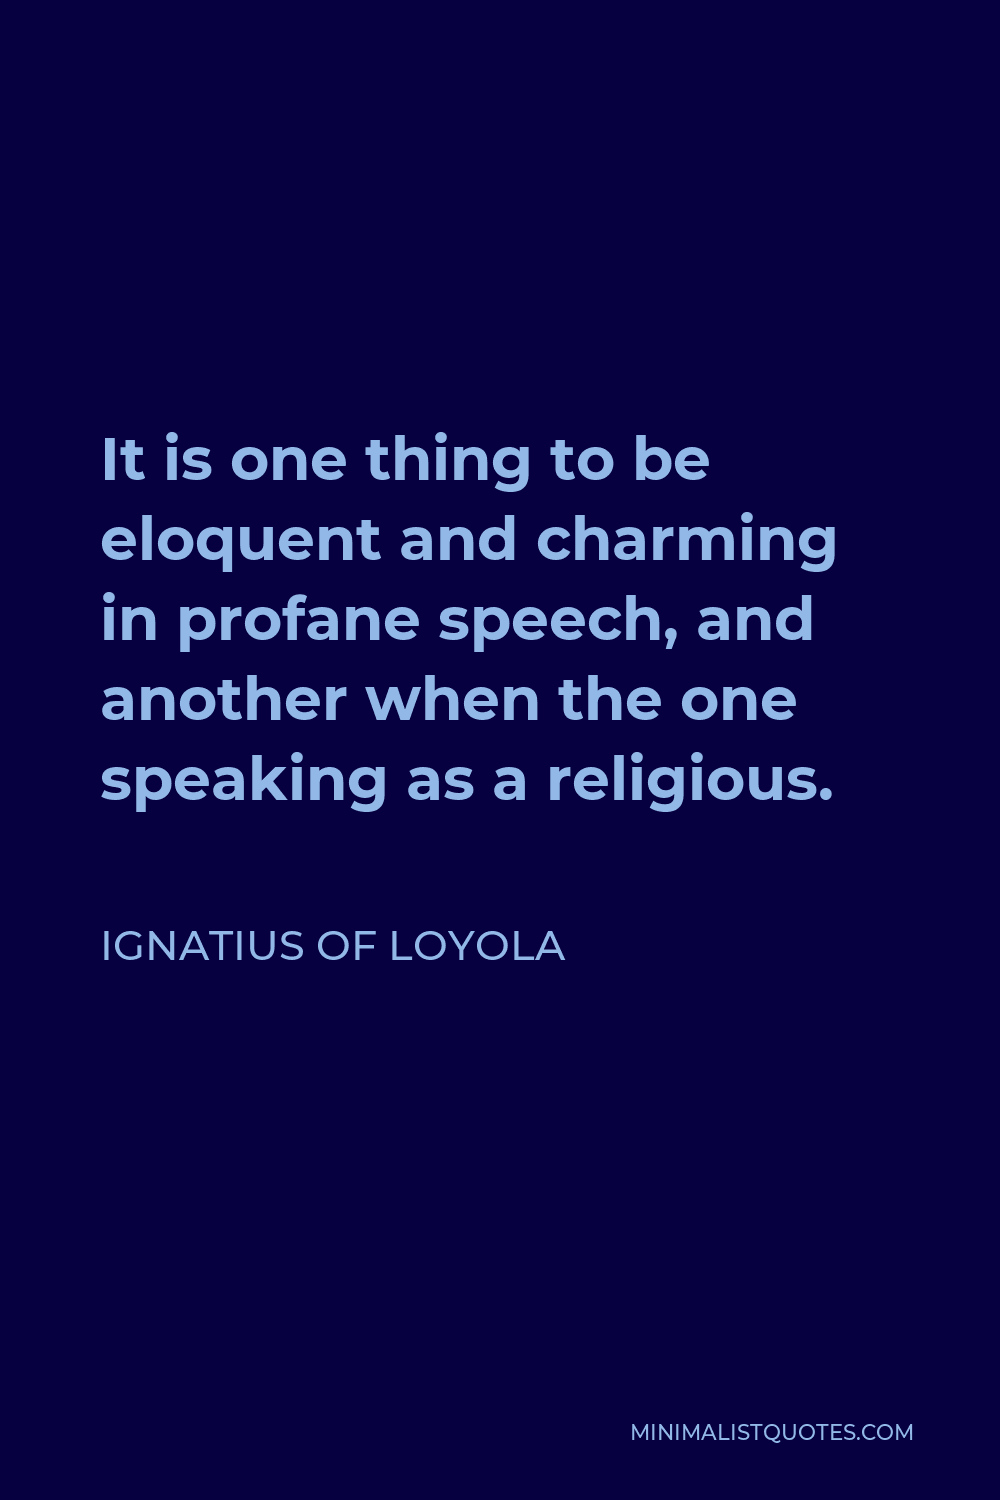 Ignatius of Loyola Quote - It is one thing to be eloquent and charming in profane speech, and another when the one speaking as a religious.